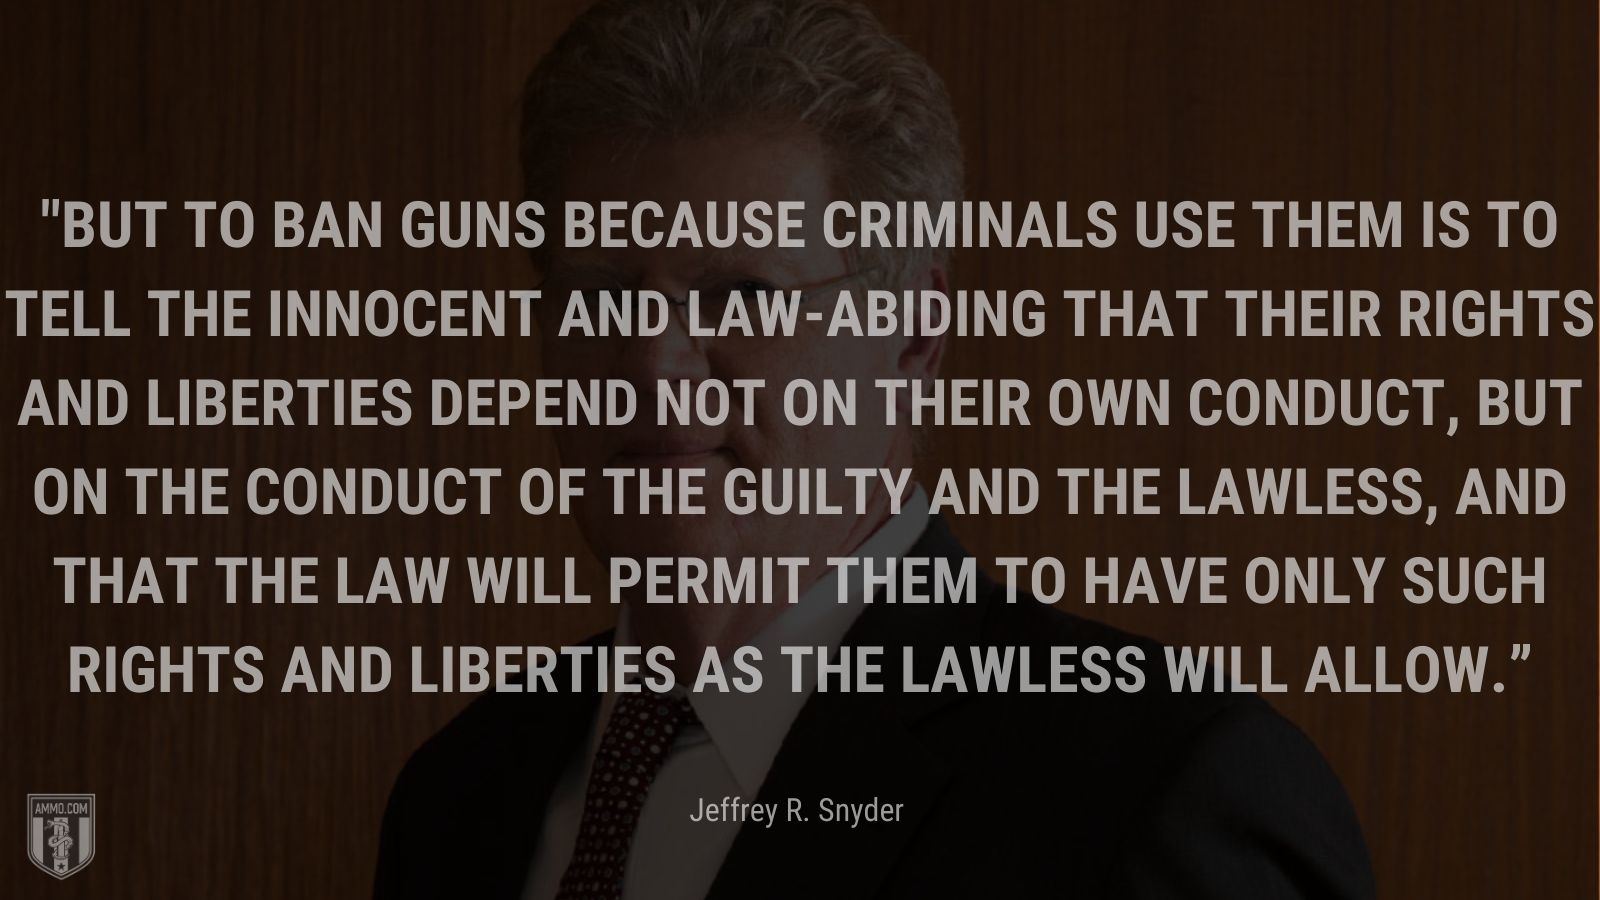 “But to ban guns because criminals use them is to tell the innocent and law-abiding that their rights and liberties depend not on their own conduct, but on the conduct of the guilty and the lawless, and that the law will permit them to have only such rights and liberties as the lawless will allow.” - Jeffrey R. Snyder